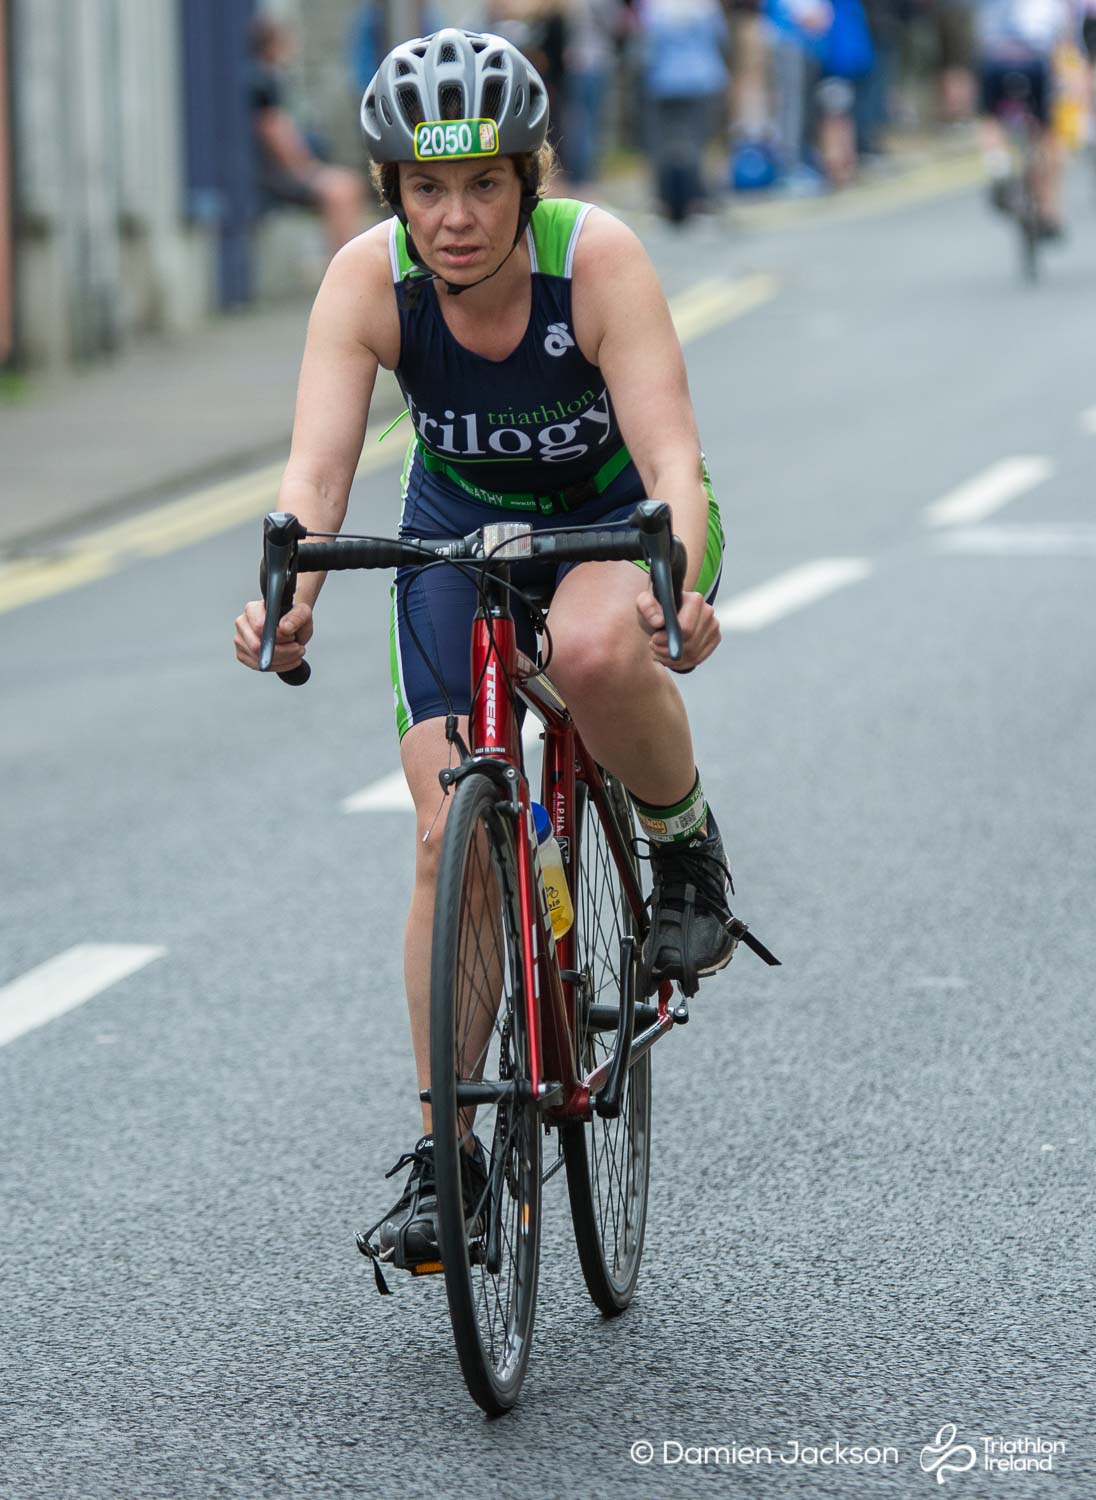 Athy_2018 (136 of 526) - TriAthy - XII Edition - 2nd June 2018